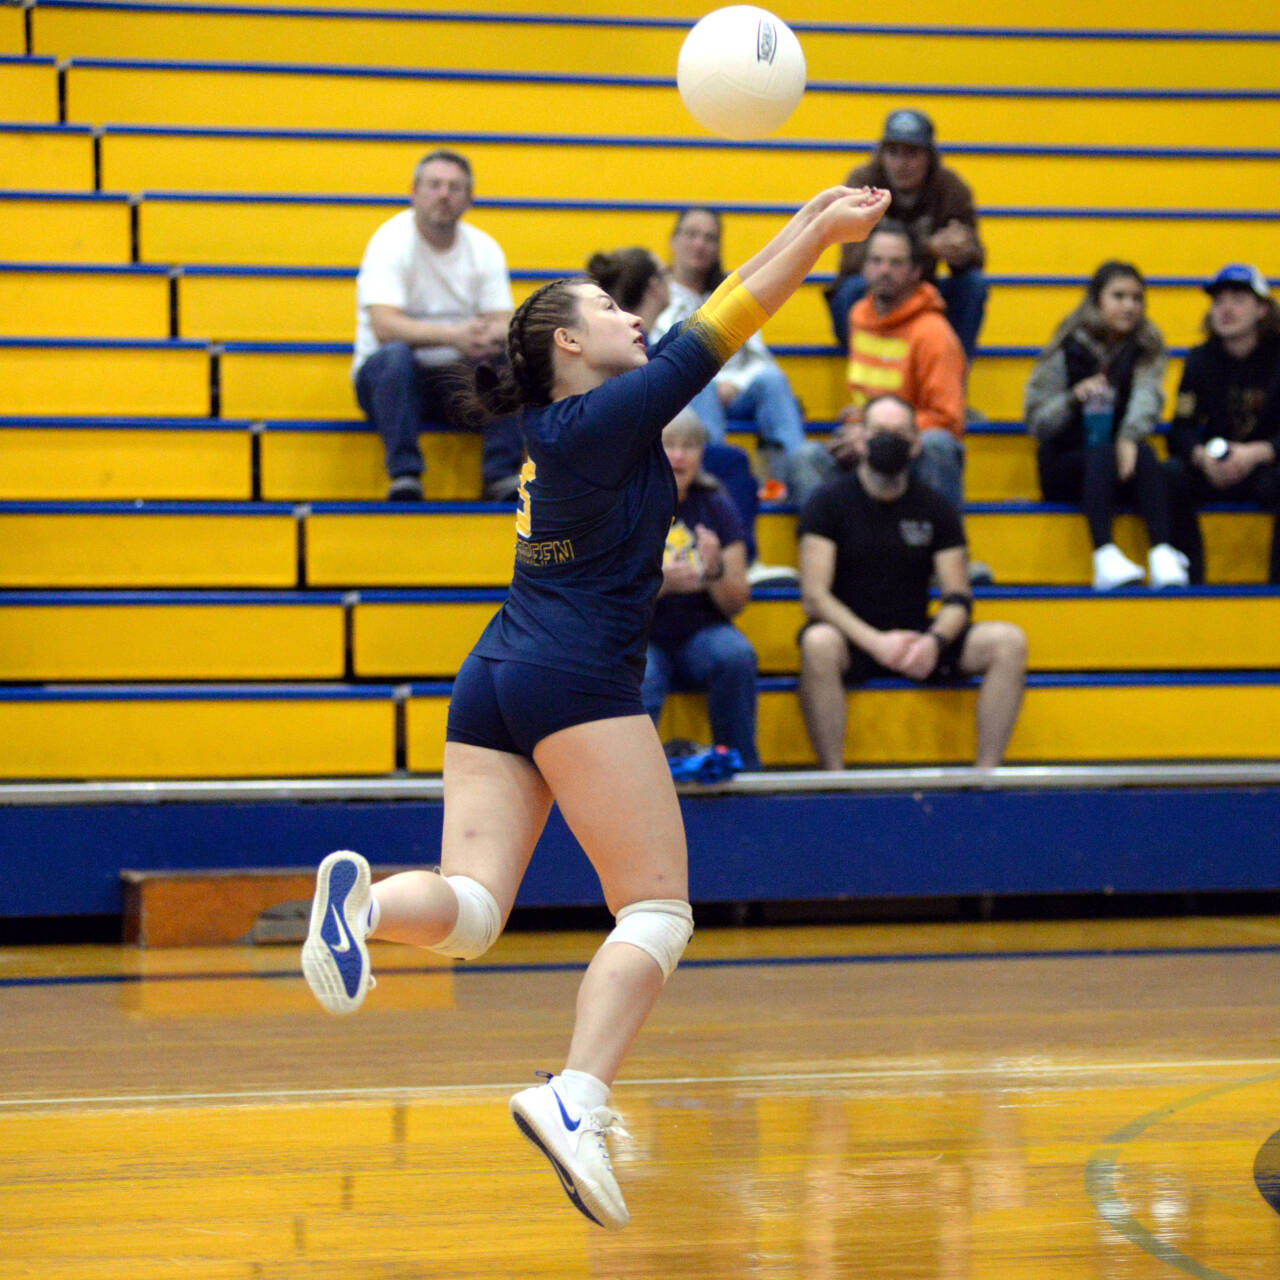 RYAN SPARKS | THE DAILY WORLD Aberdeen senior setter Cameryn Micheau leaps to make a pass during a 3-0 victory over Rochester on Thursday at Aberdeen High School.